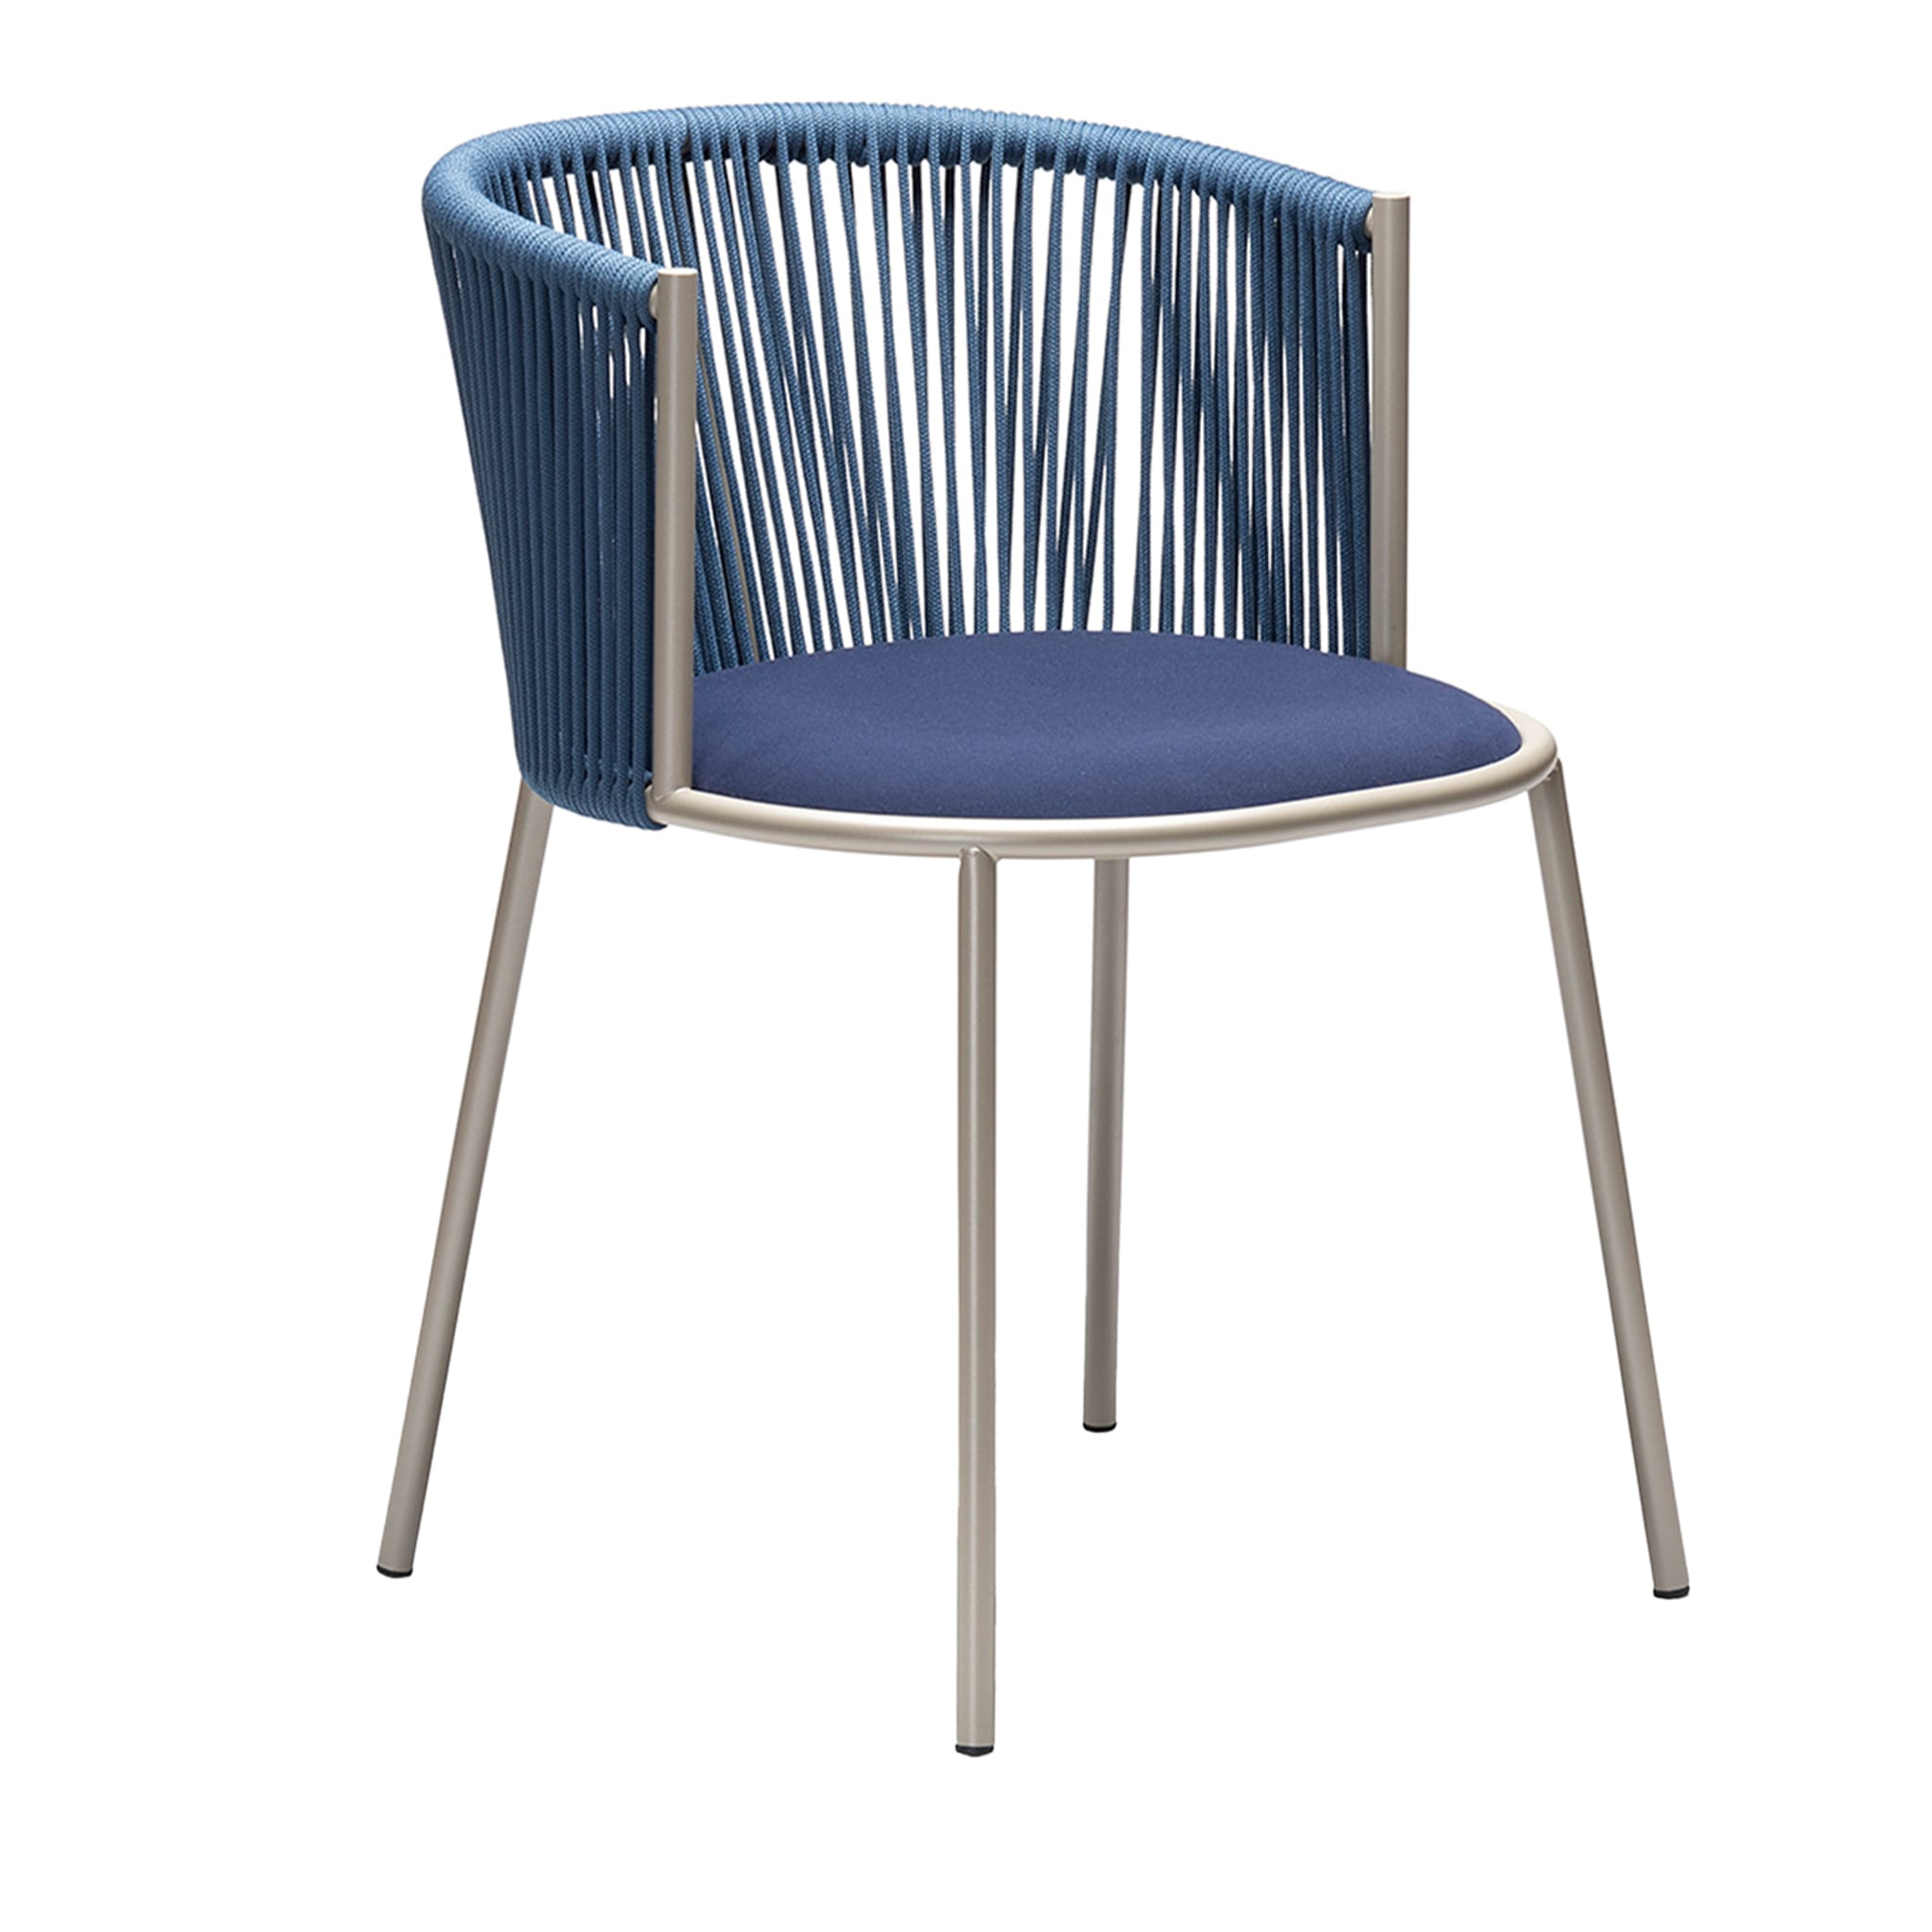 Millie SP Blue Chair by Studio Pastina - Main view